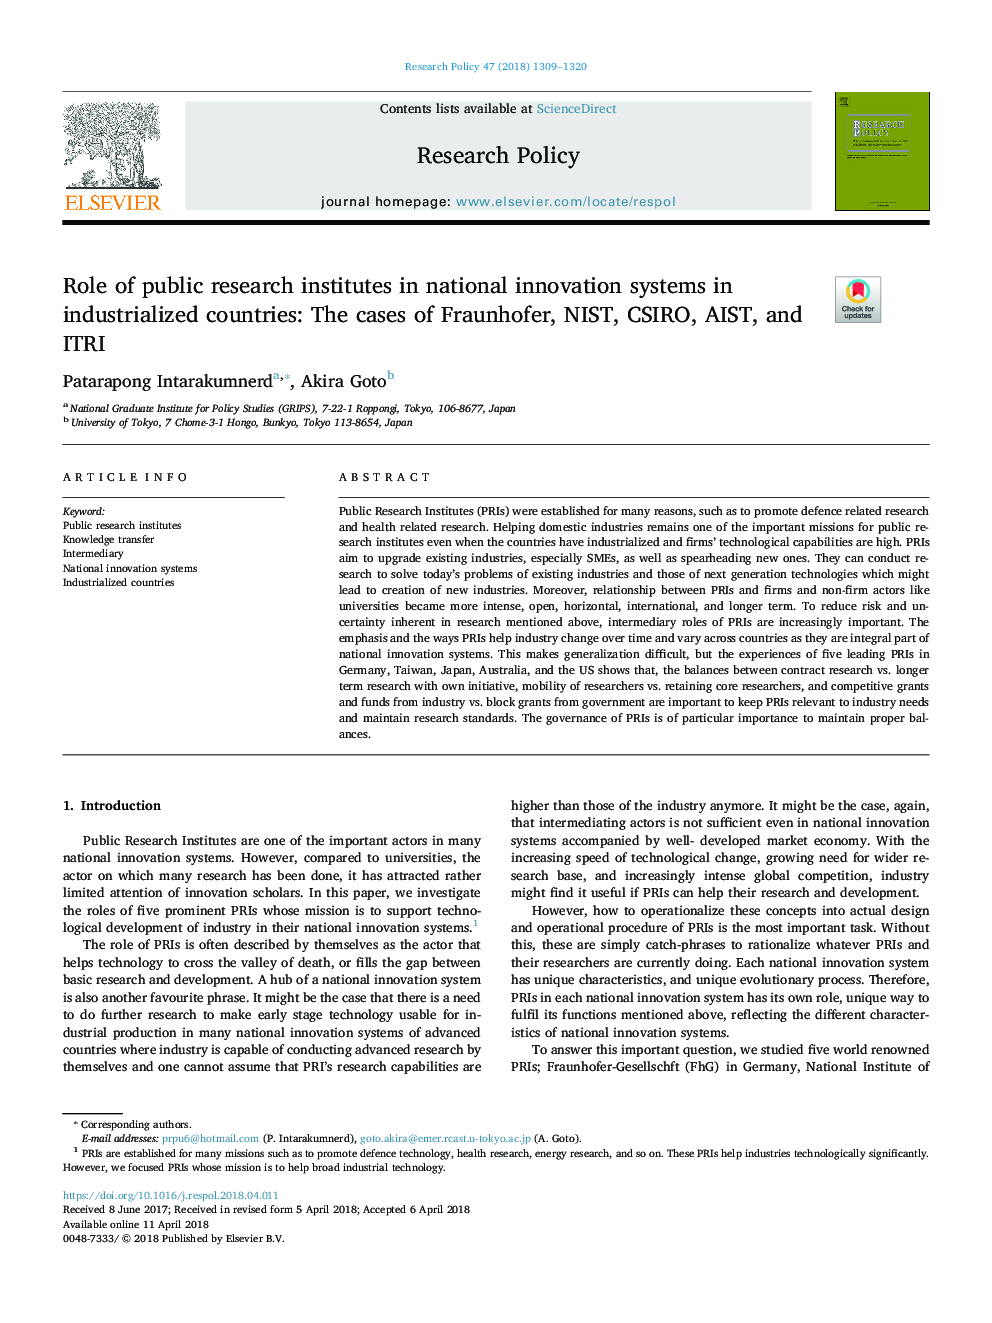 Role of public research institutes in national innovation systems in industrialized countries: The cases of Fraunhofer, NIST, CSIRO, AIST, and ITRI